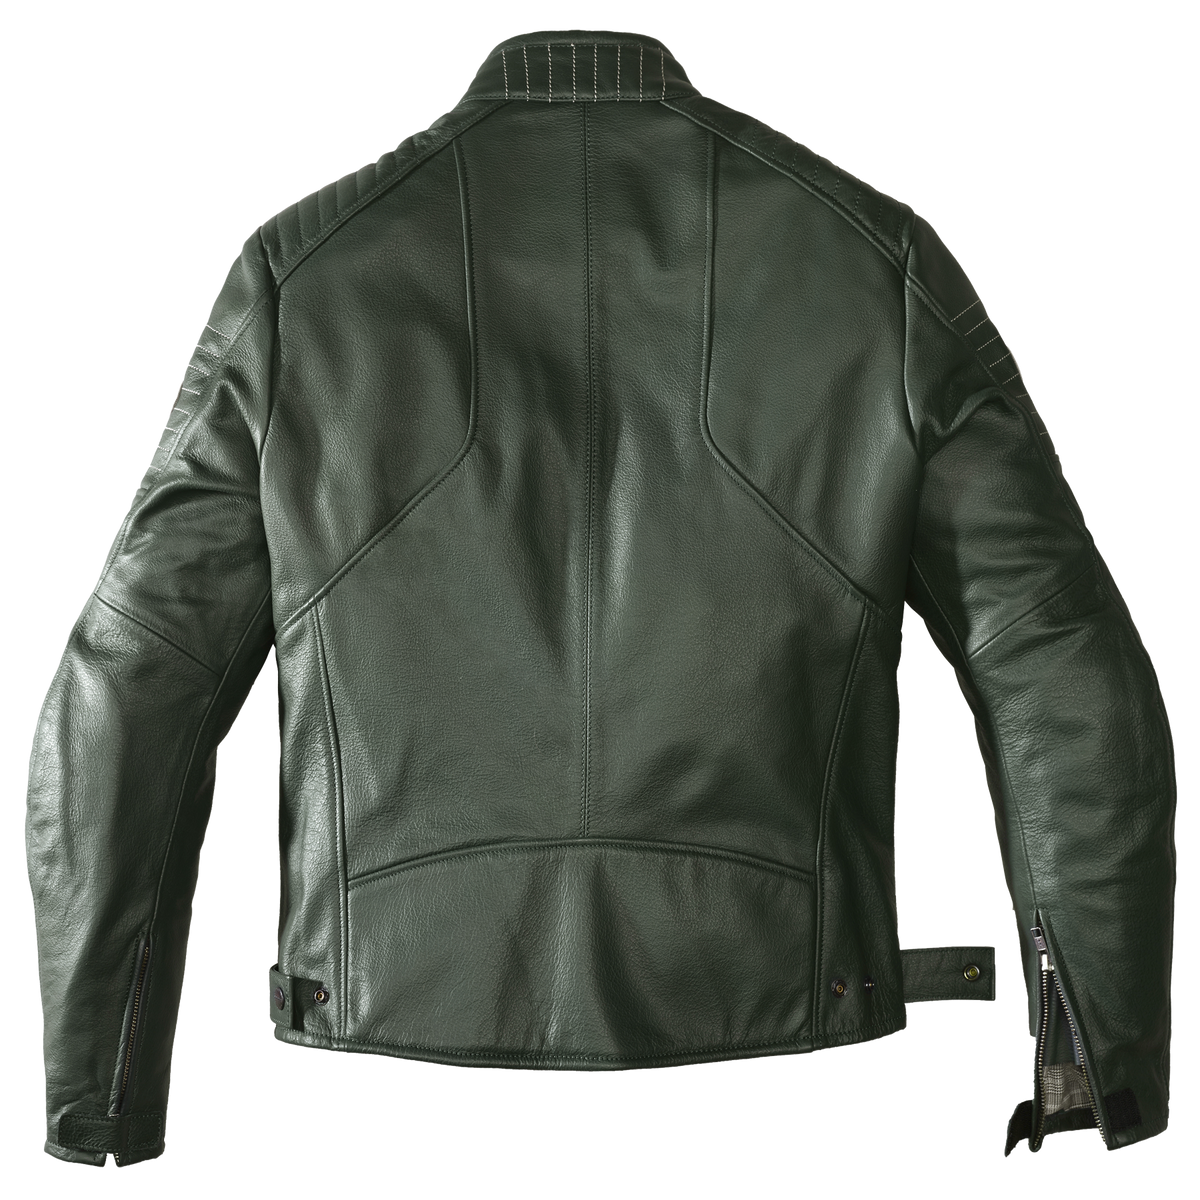 A Dash Of Classic Style: Spidi Clubber Jacket